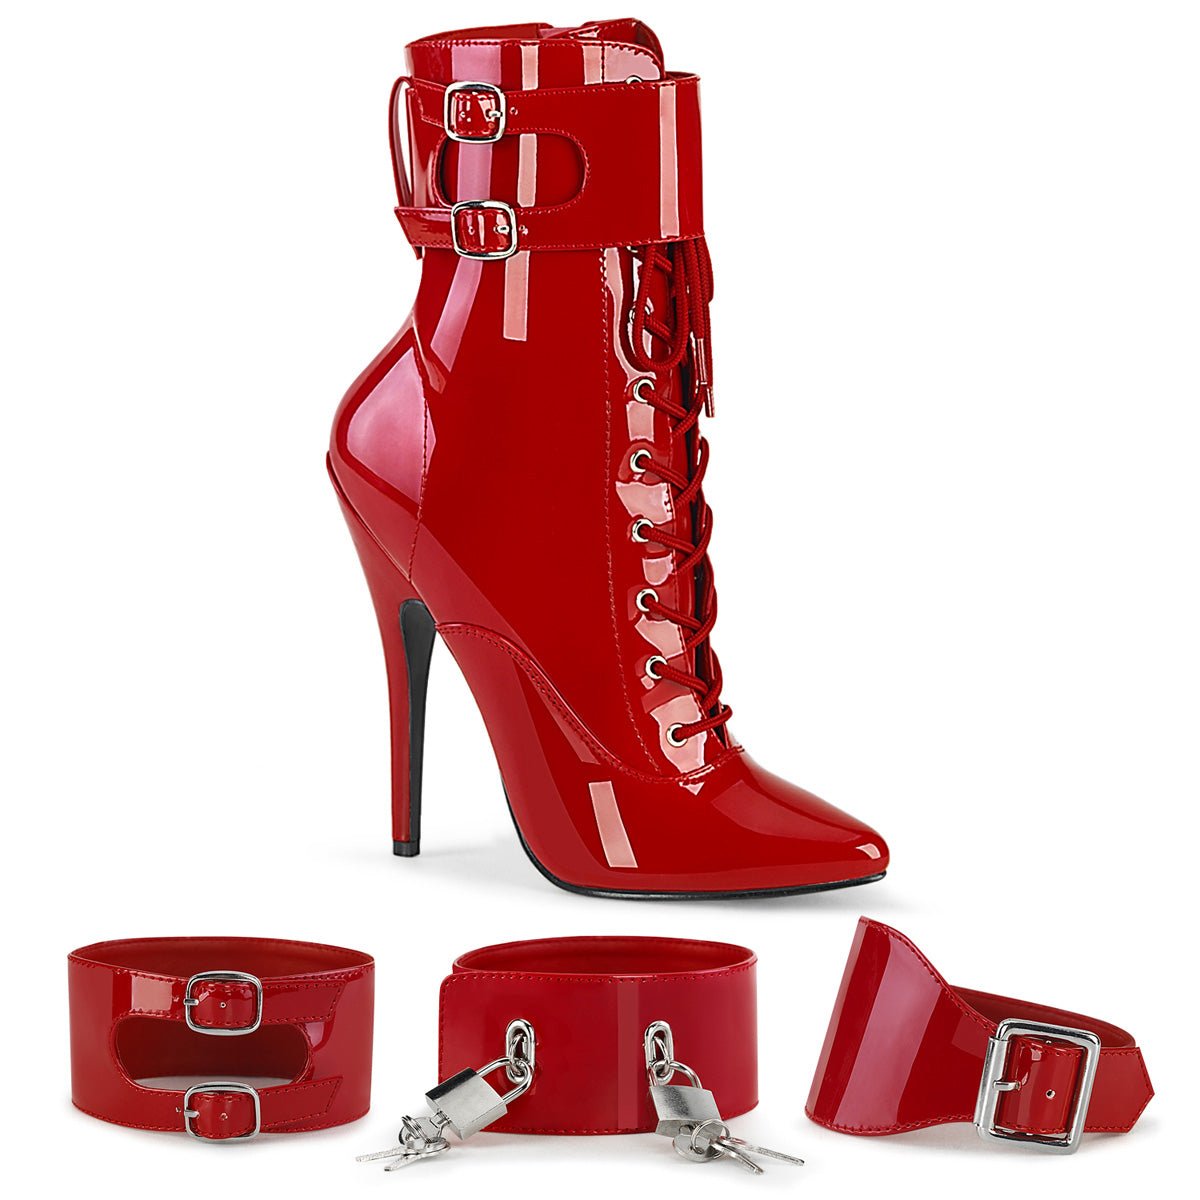 Devious DOMINA 1023 - From Devious Sold By Alternative Footwear